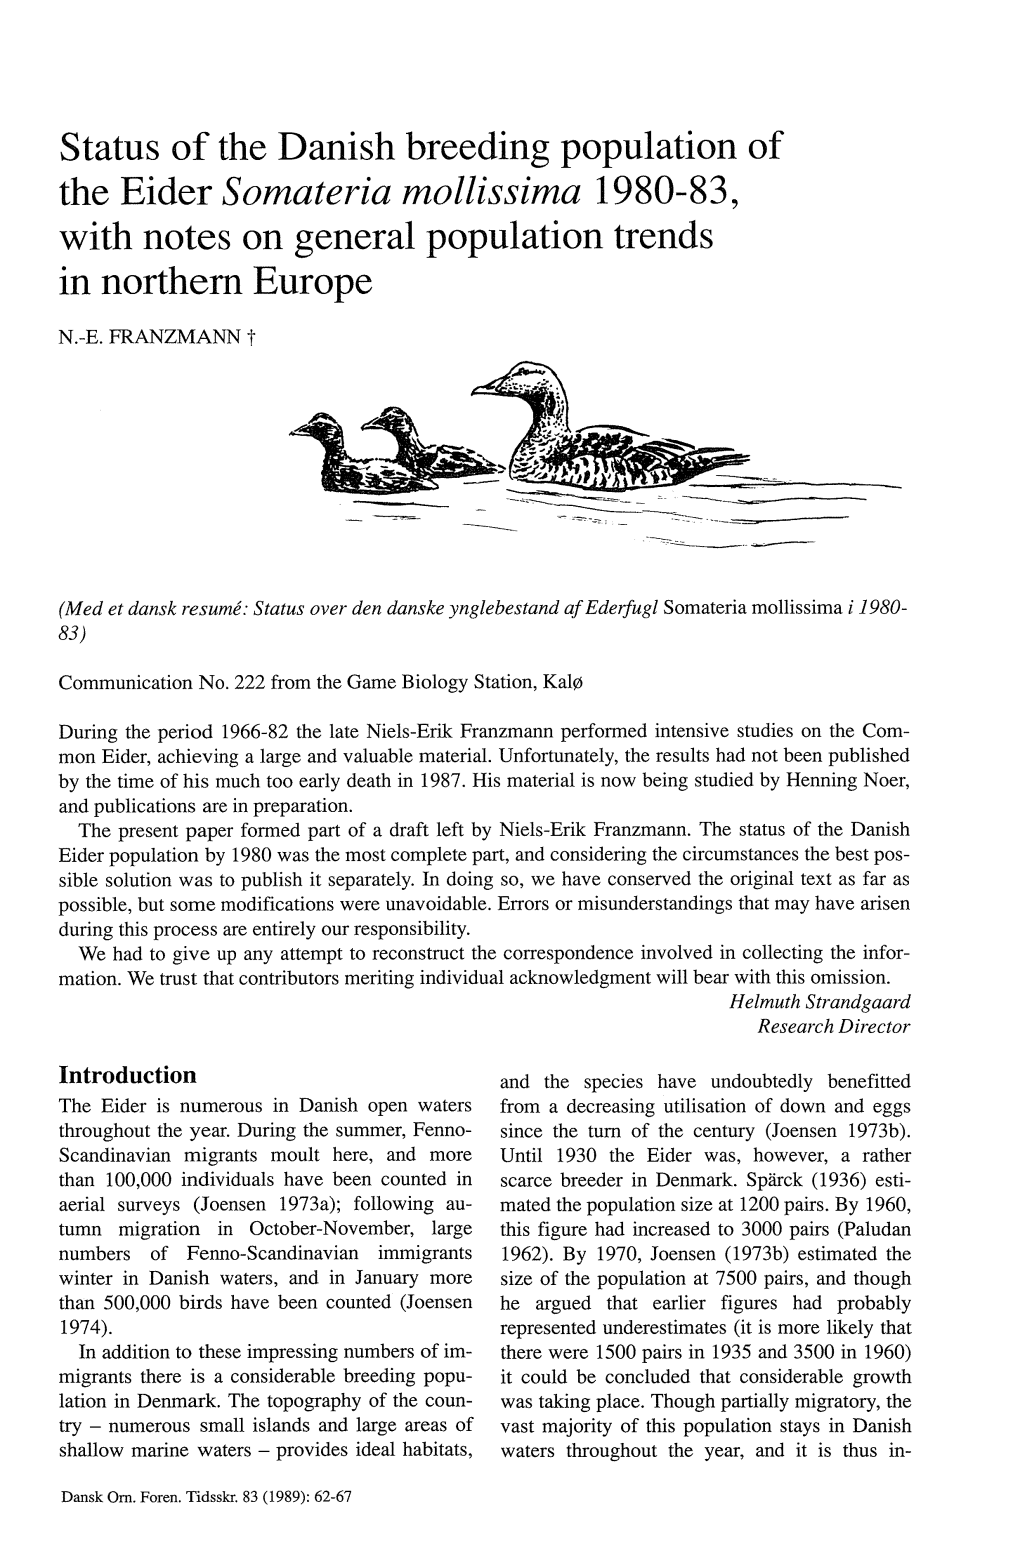 Status of the Danish Breeding Population of the Eider Somateria Mollissima 1980-83, with Notes on General Population Trends in Northem Europe